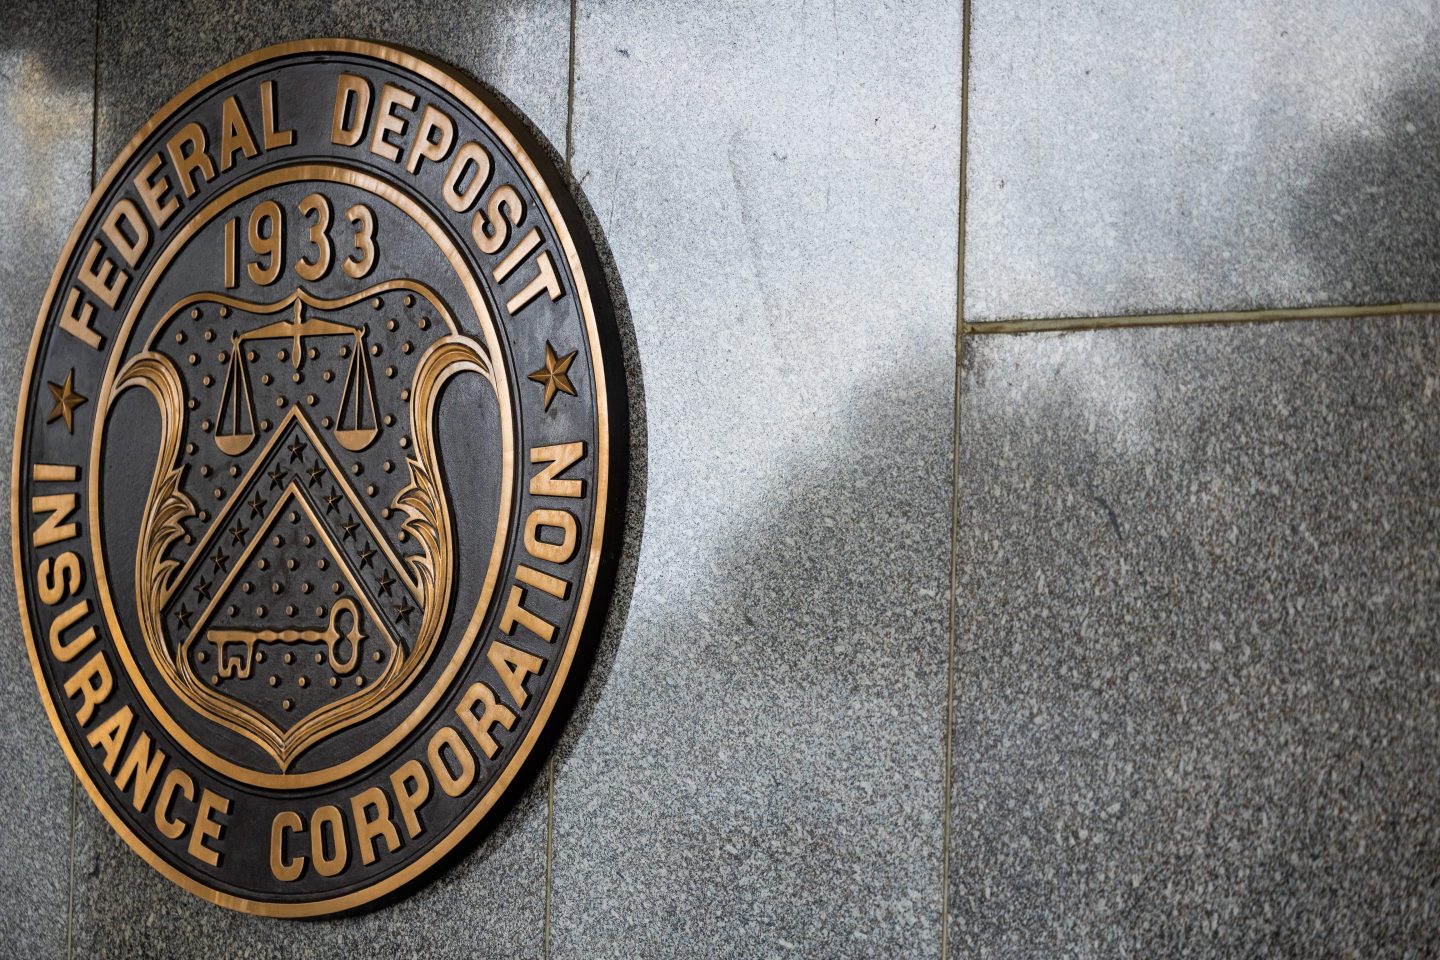 WASHINGTON DC, UNITED STATES &#8211; MARCH 13: Logos are seen on the outside of the Federal Deposit Insurance Corp. (FDIC) building on March 13, 2023 in Washington, DC. (Photo by Nathan Posner/Anadolu Agency via Getty Images)